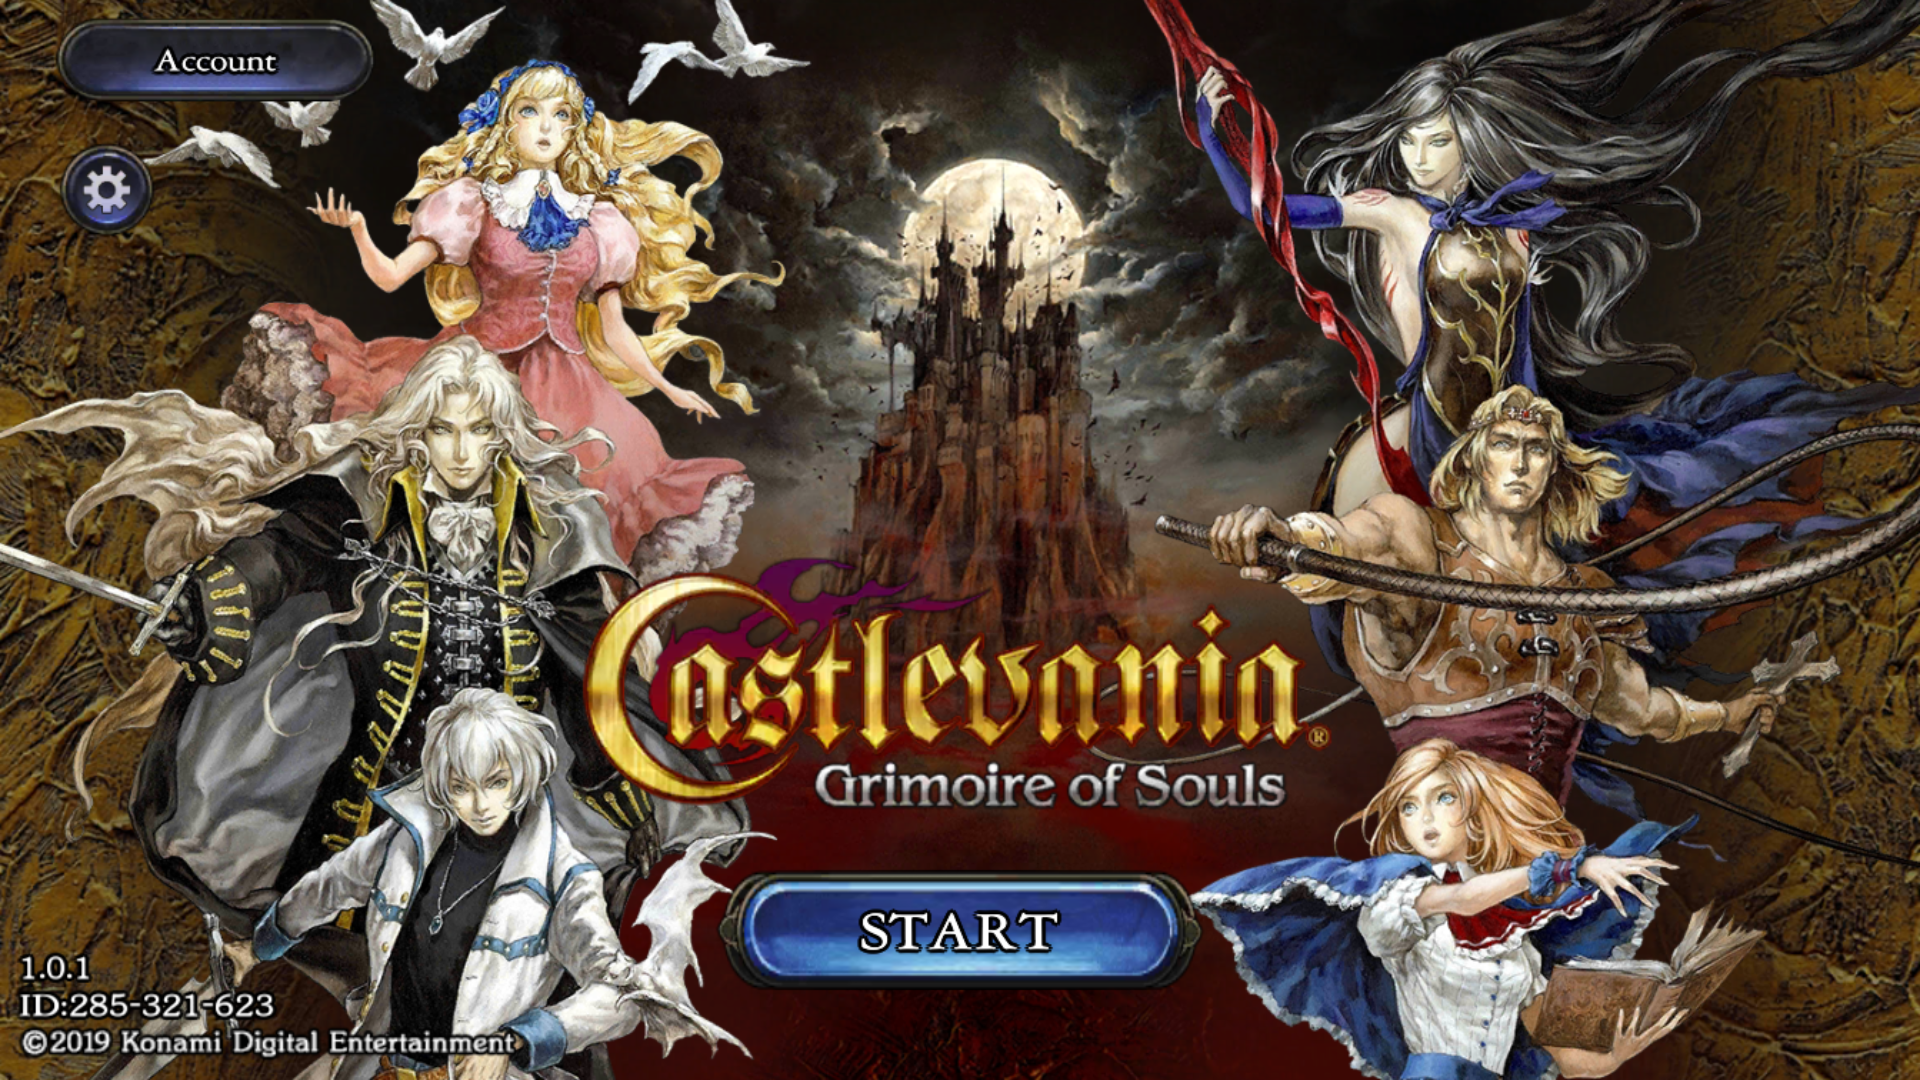 wiki list of castlevania games